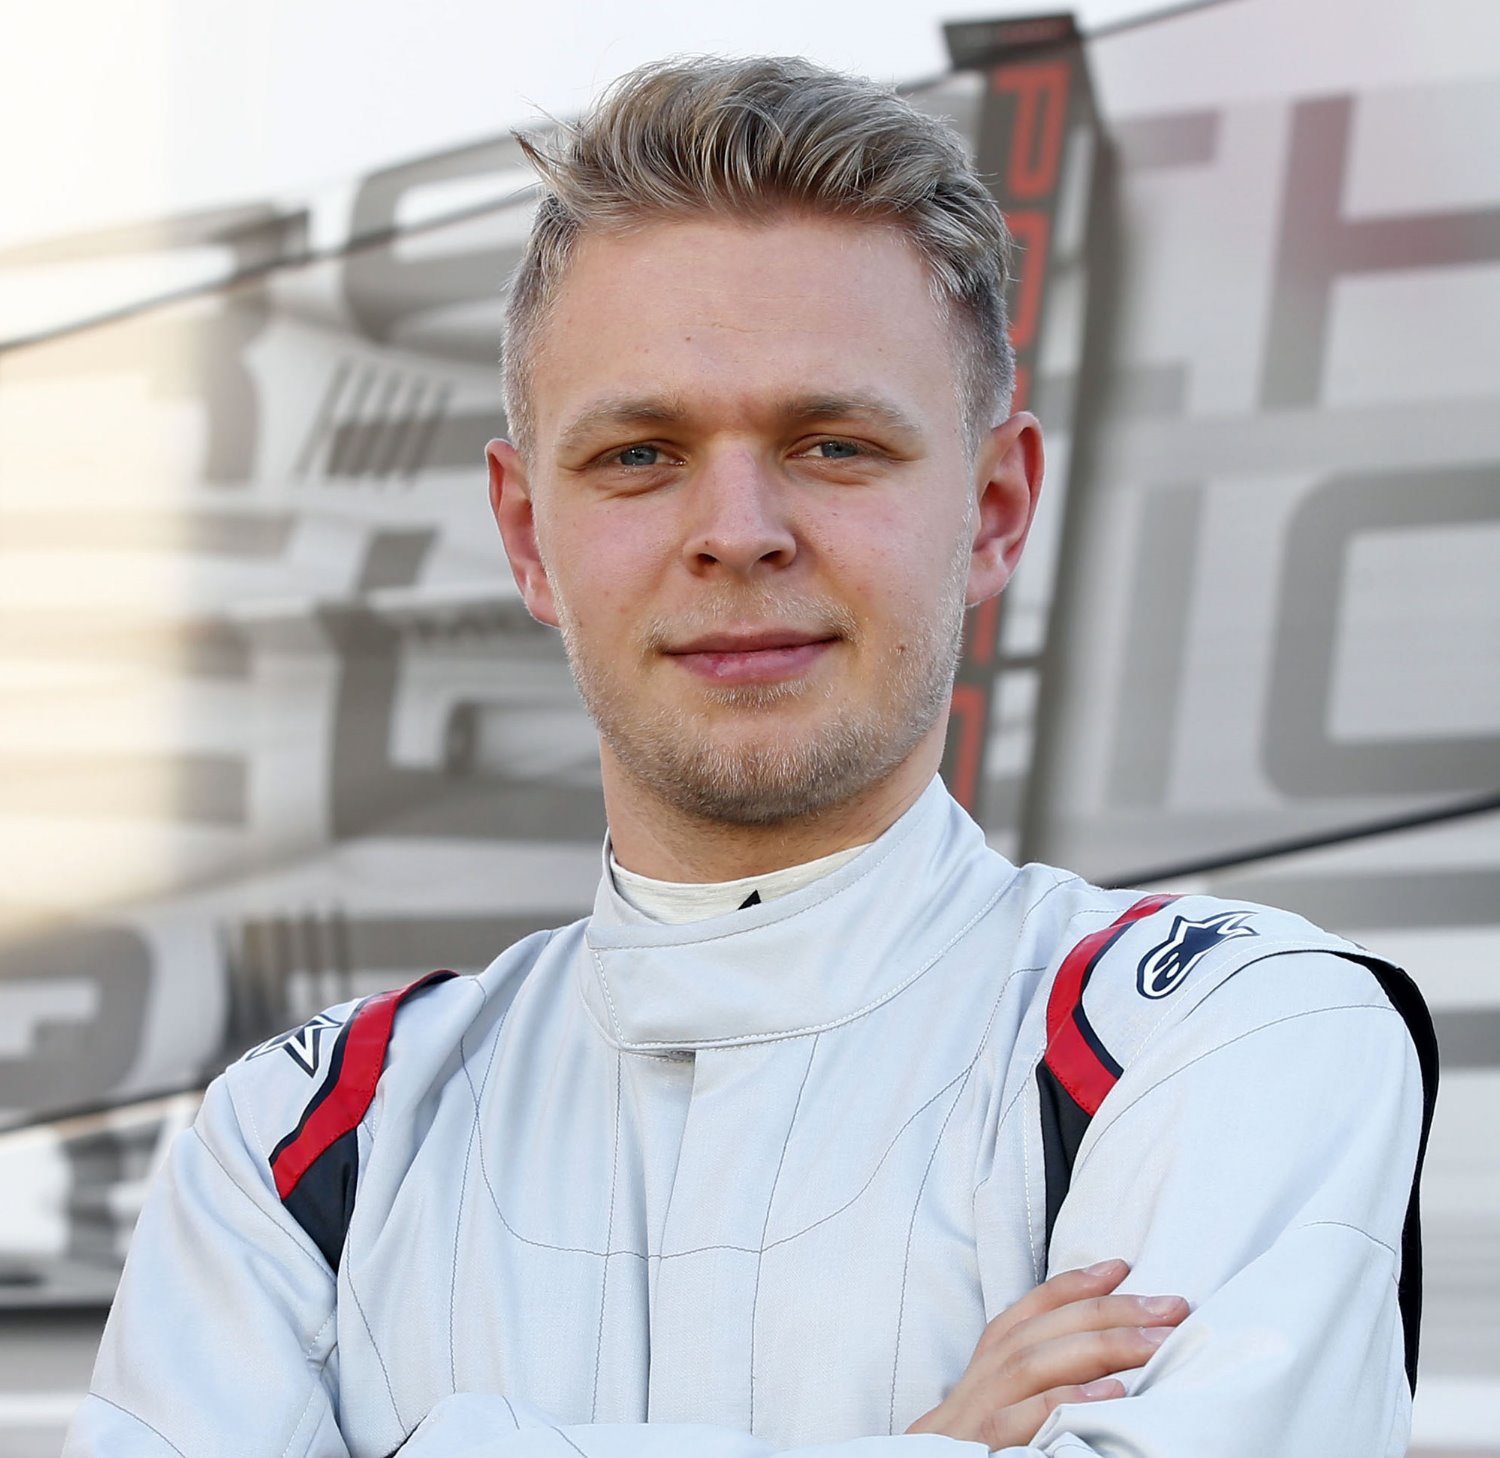 Kevin Magnussen wasn't fast enough for the size of his check